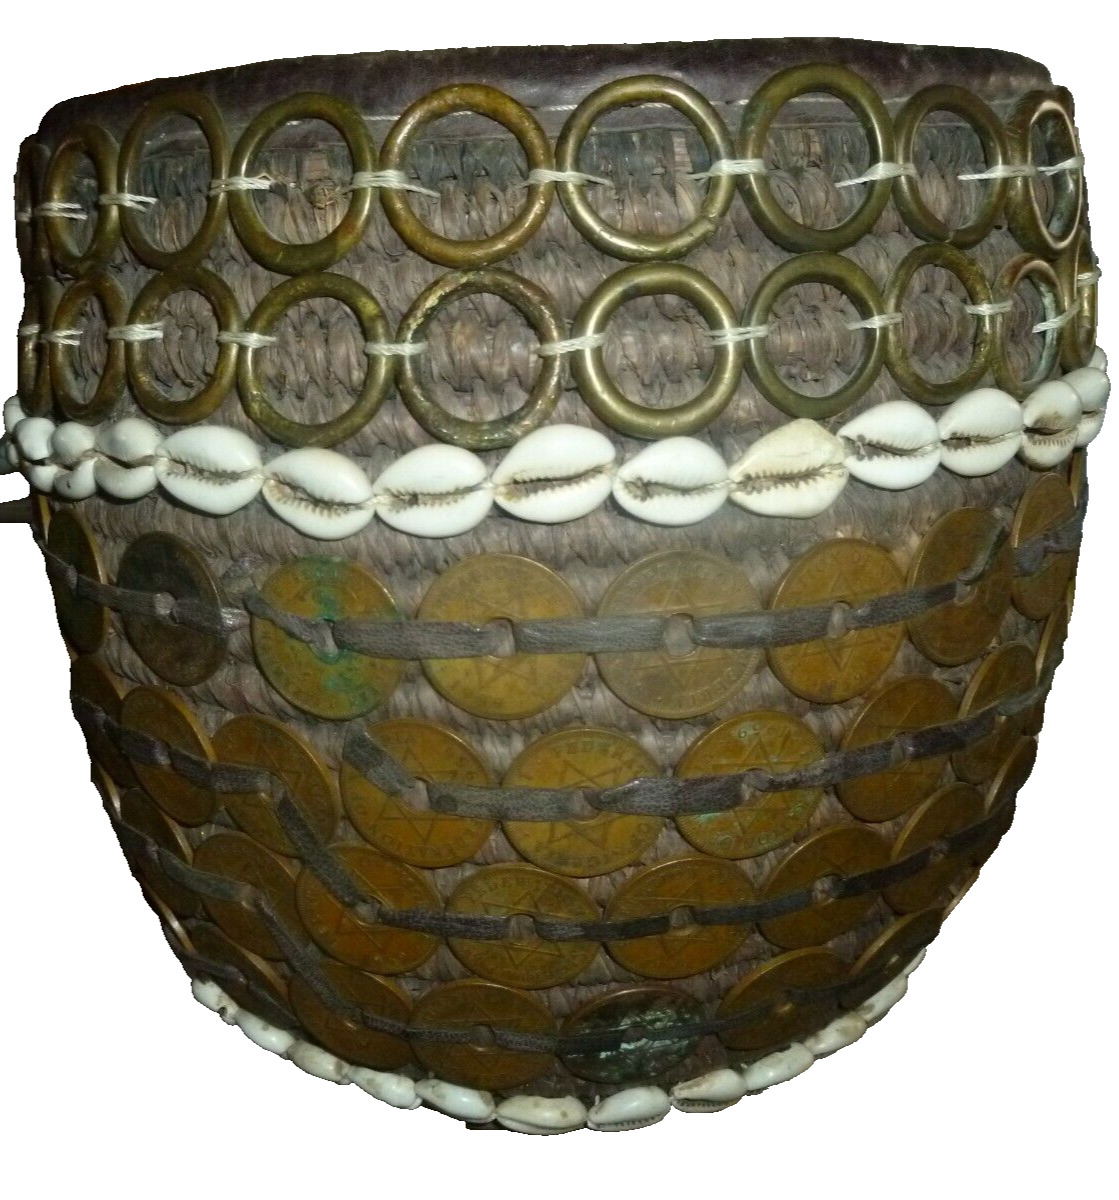 Antique Yoruba African Tribal Basket Cowrie Shell Leather Coins Nigeria LARGE